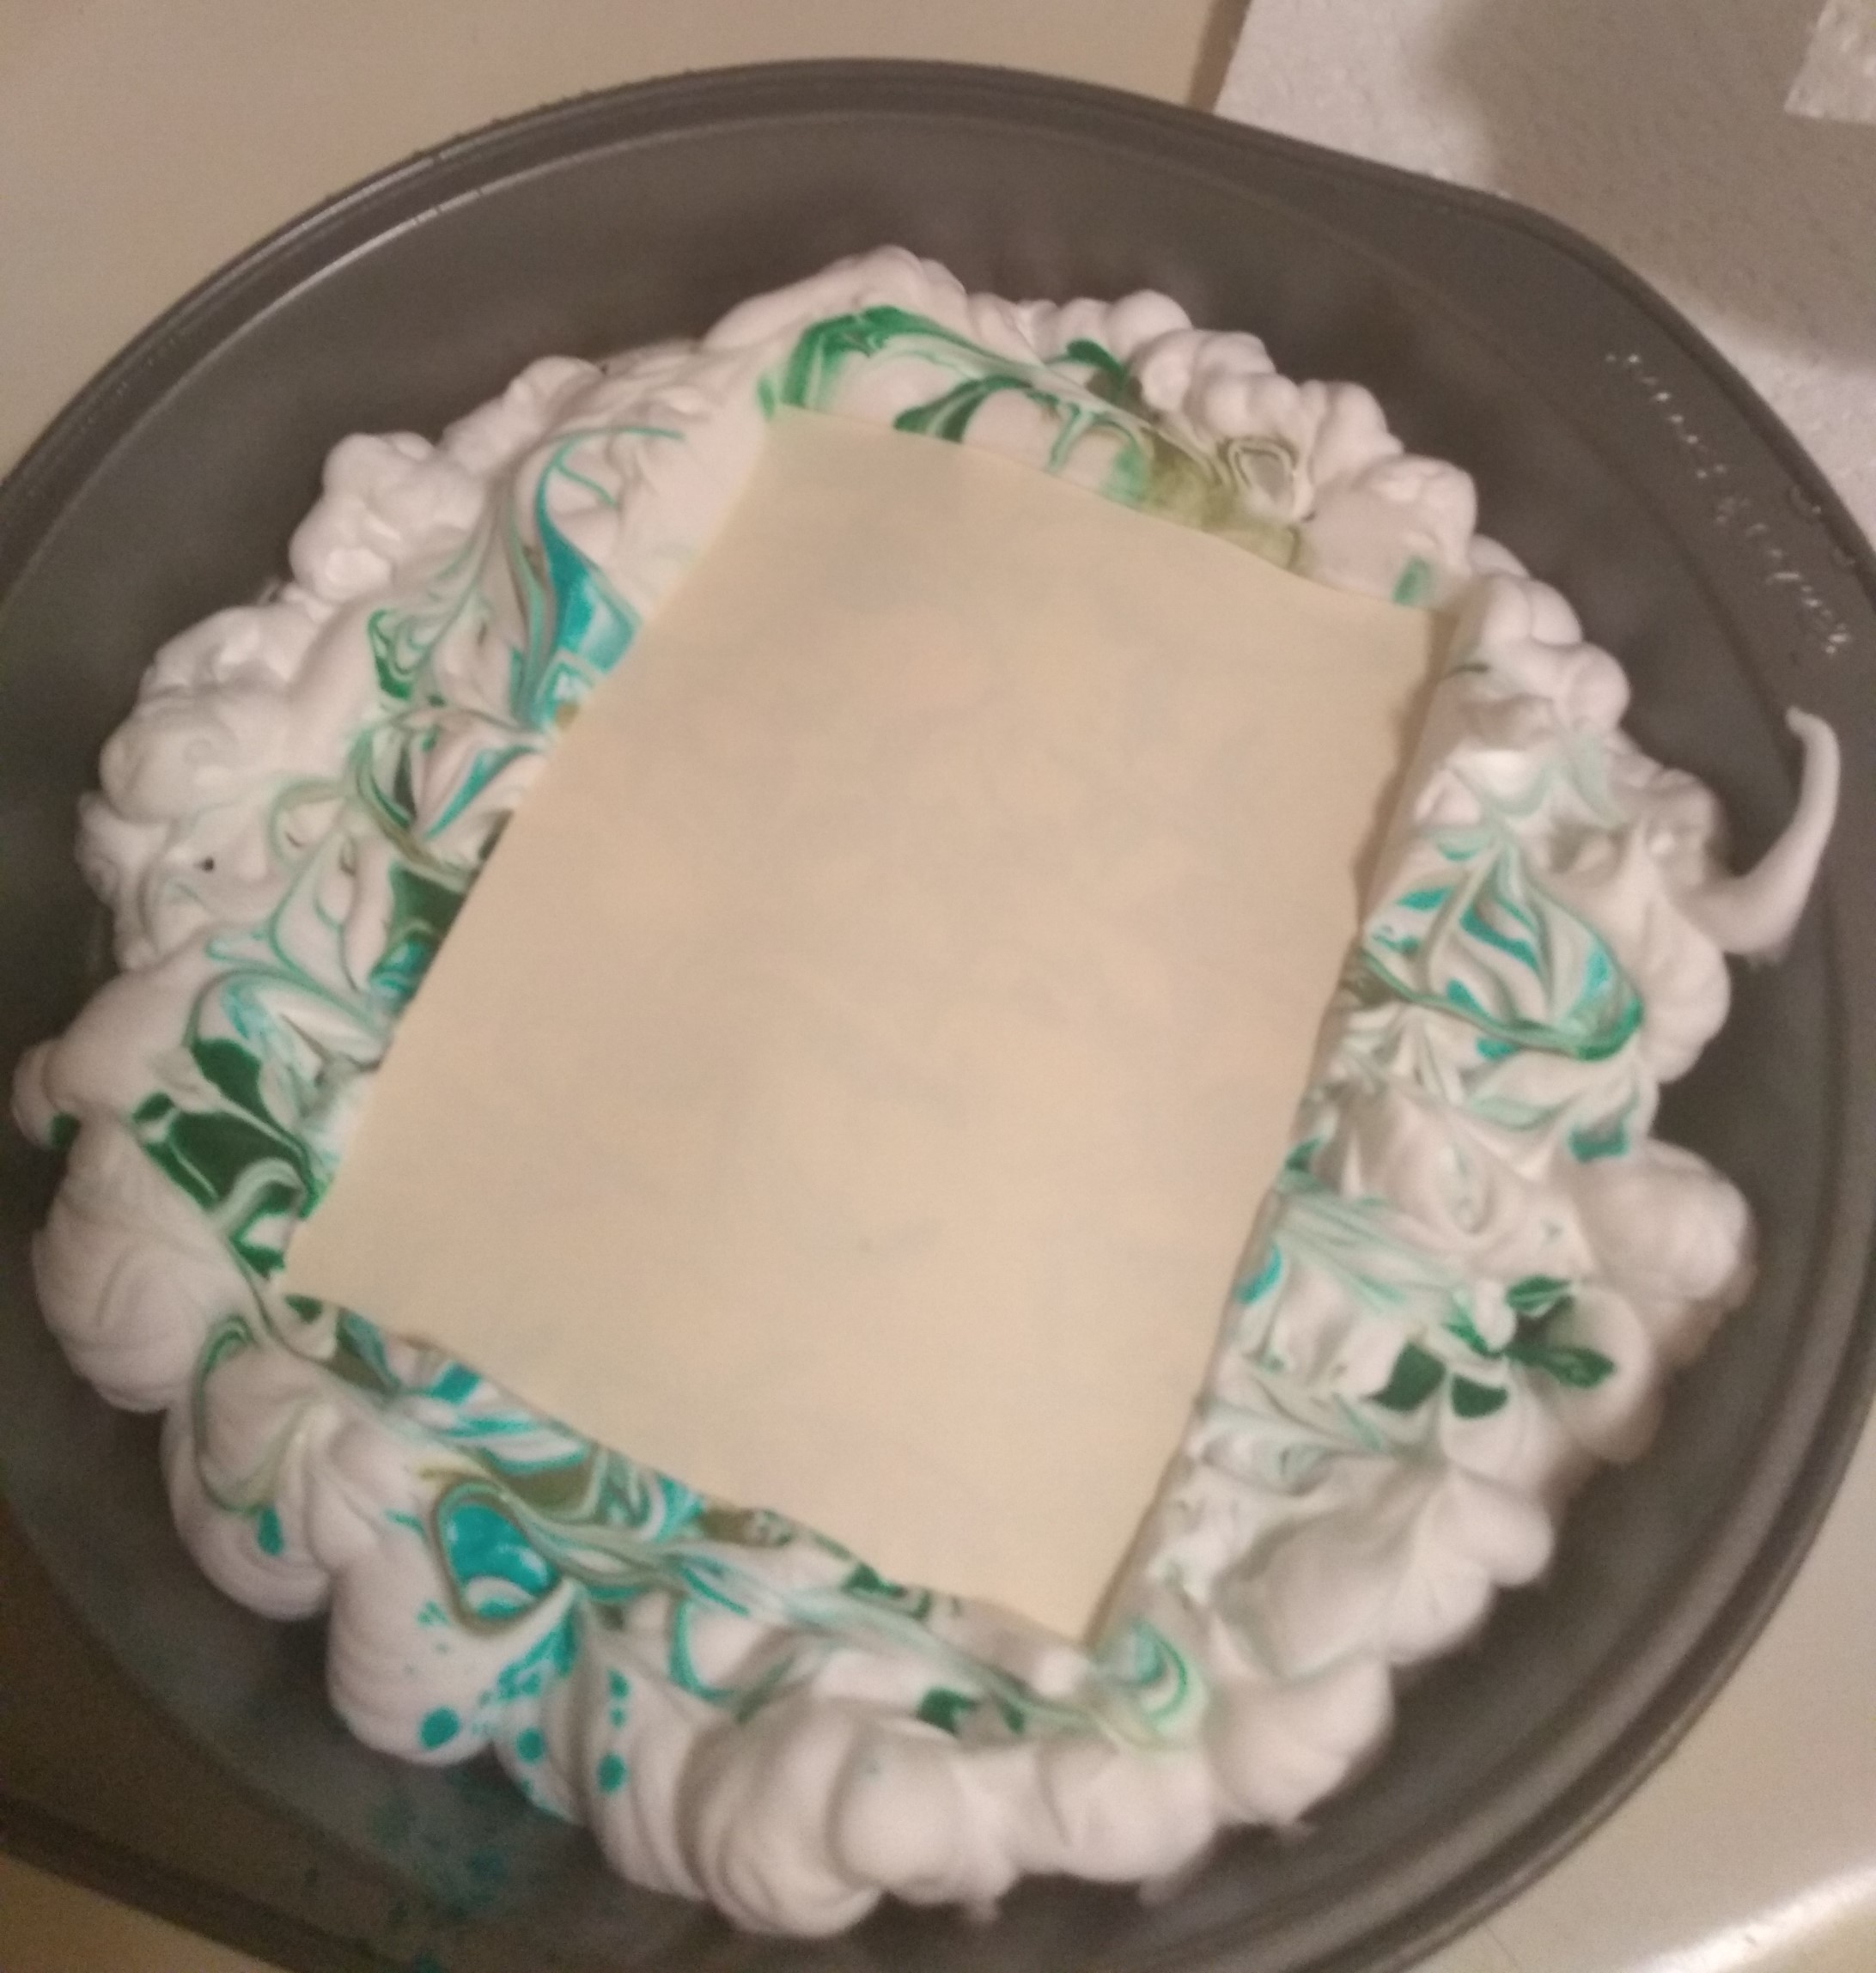 A piece of paper sits in a tray of dyed shaving cream